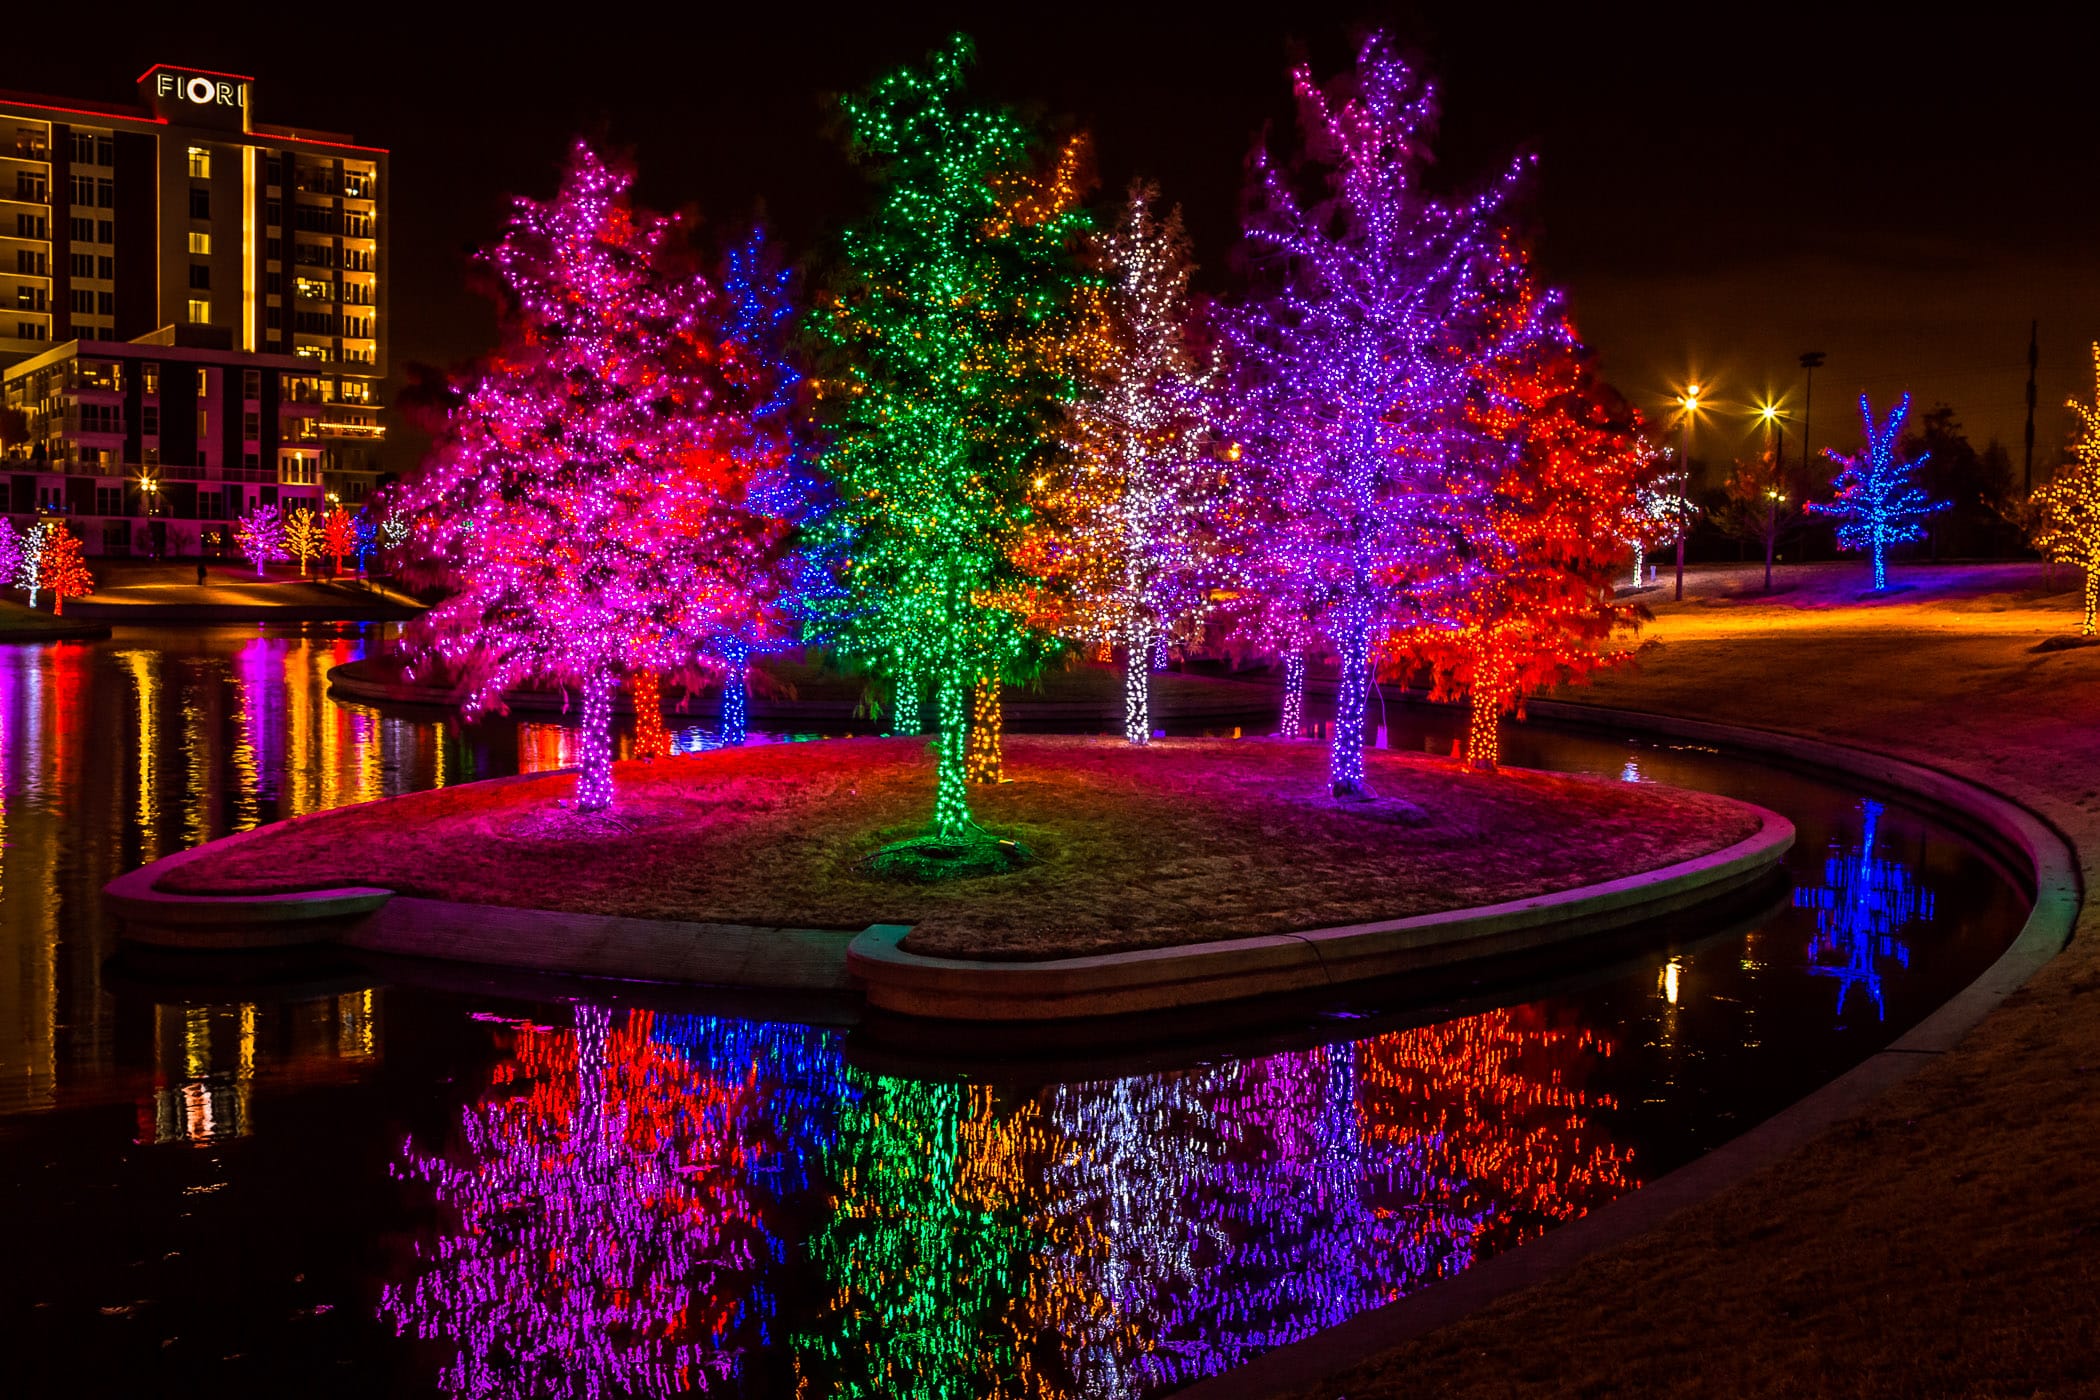 Trees in Addison, Texas’ Vitruvian Park decorated with multi-colored lights for the holidays.